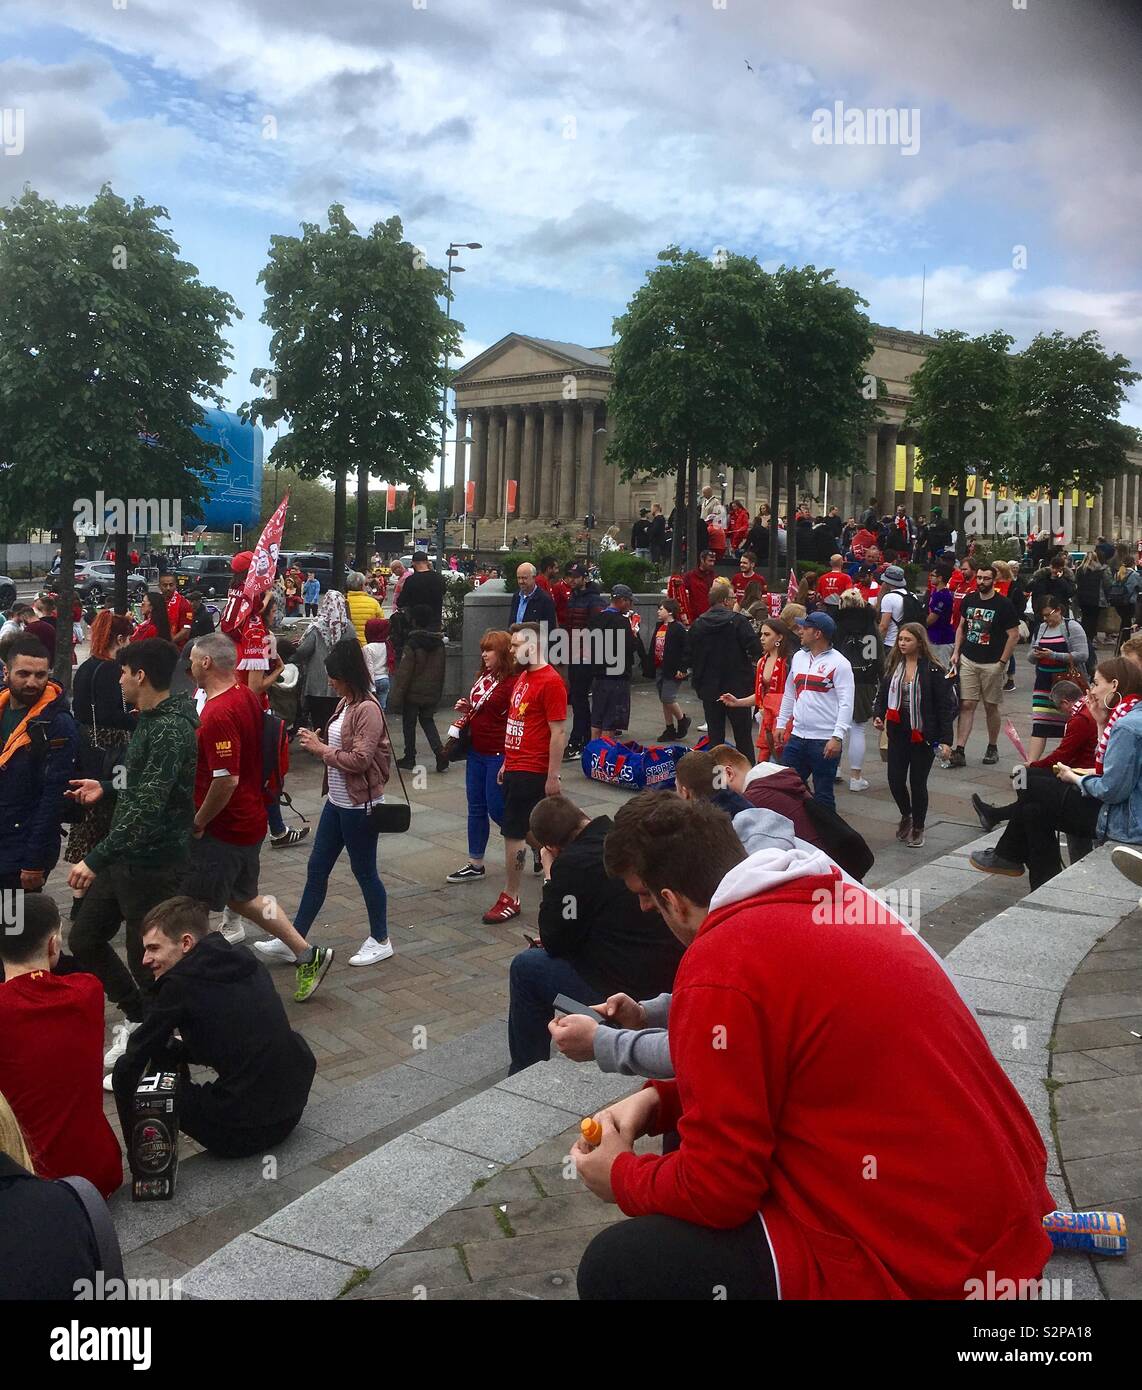 Outside Lime Street Station, Liverpool celebrating winning the Champions League Cup, 2019. Stock Photo